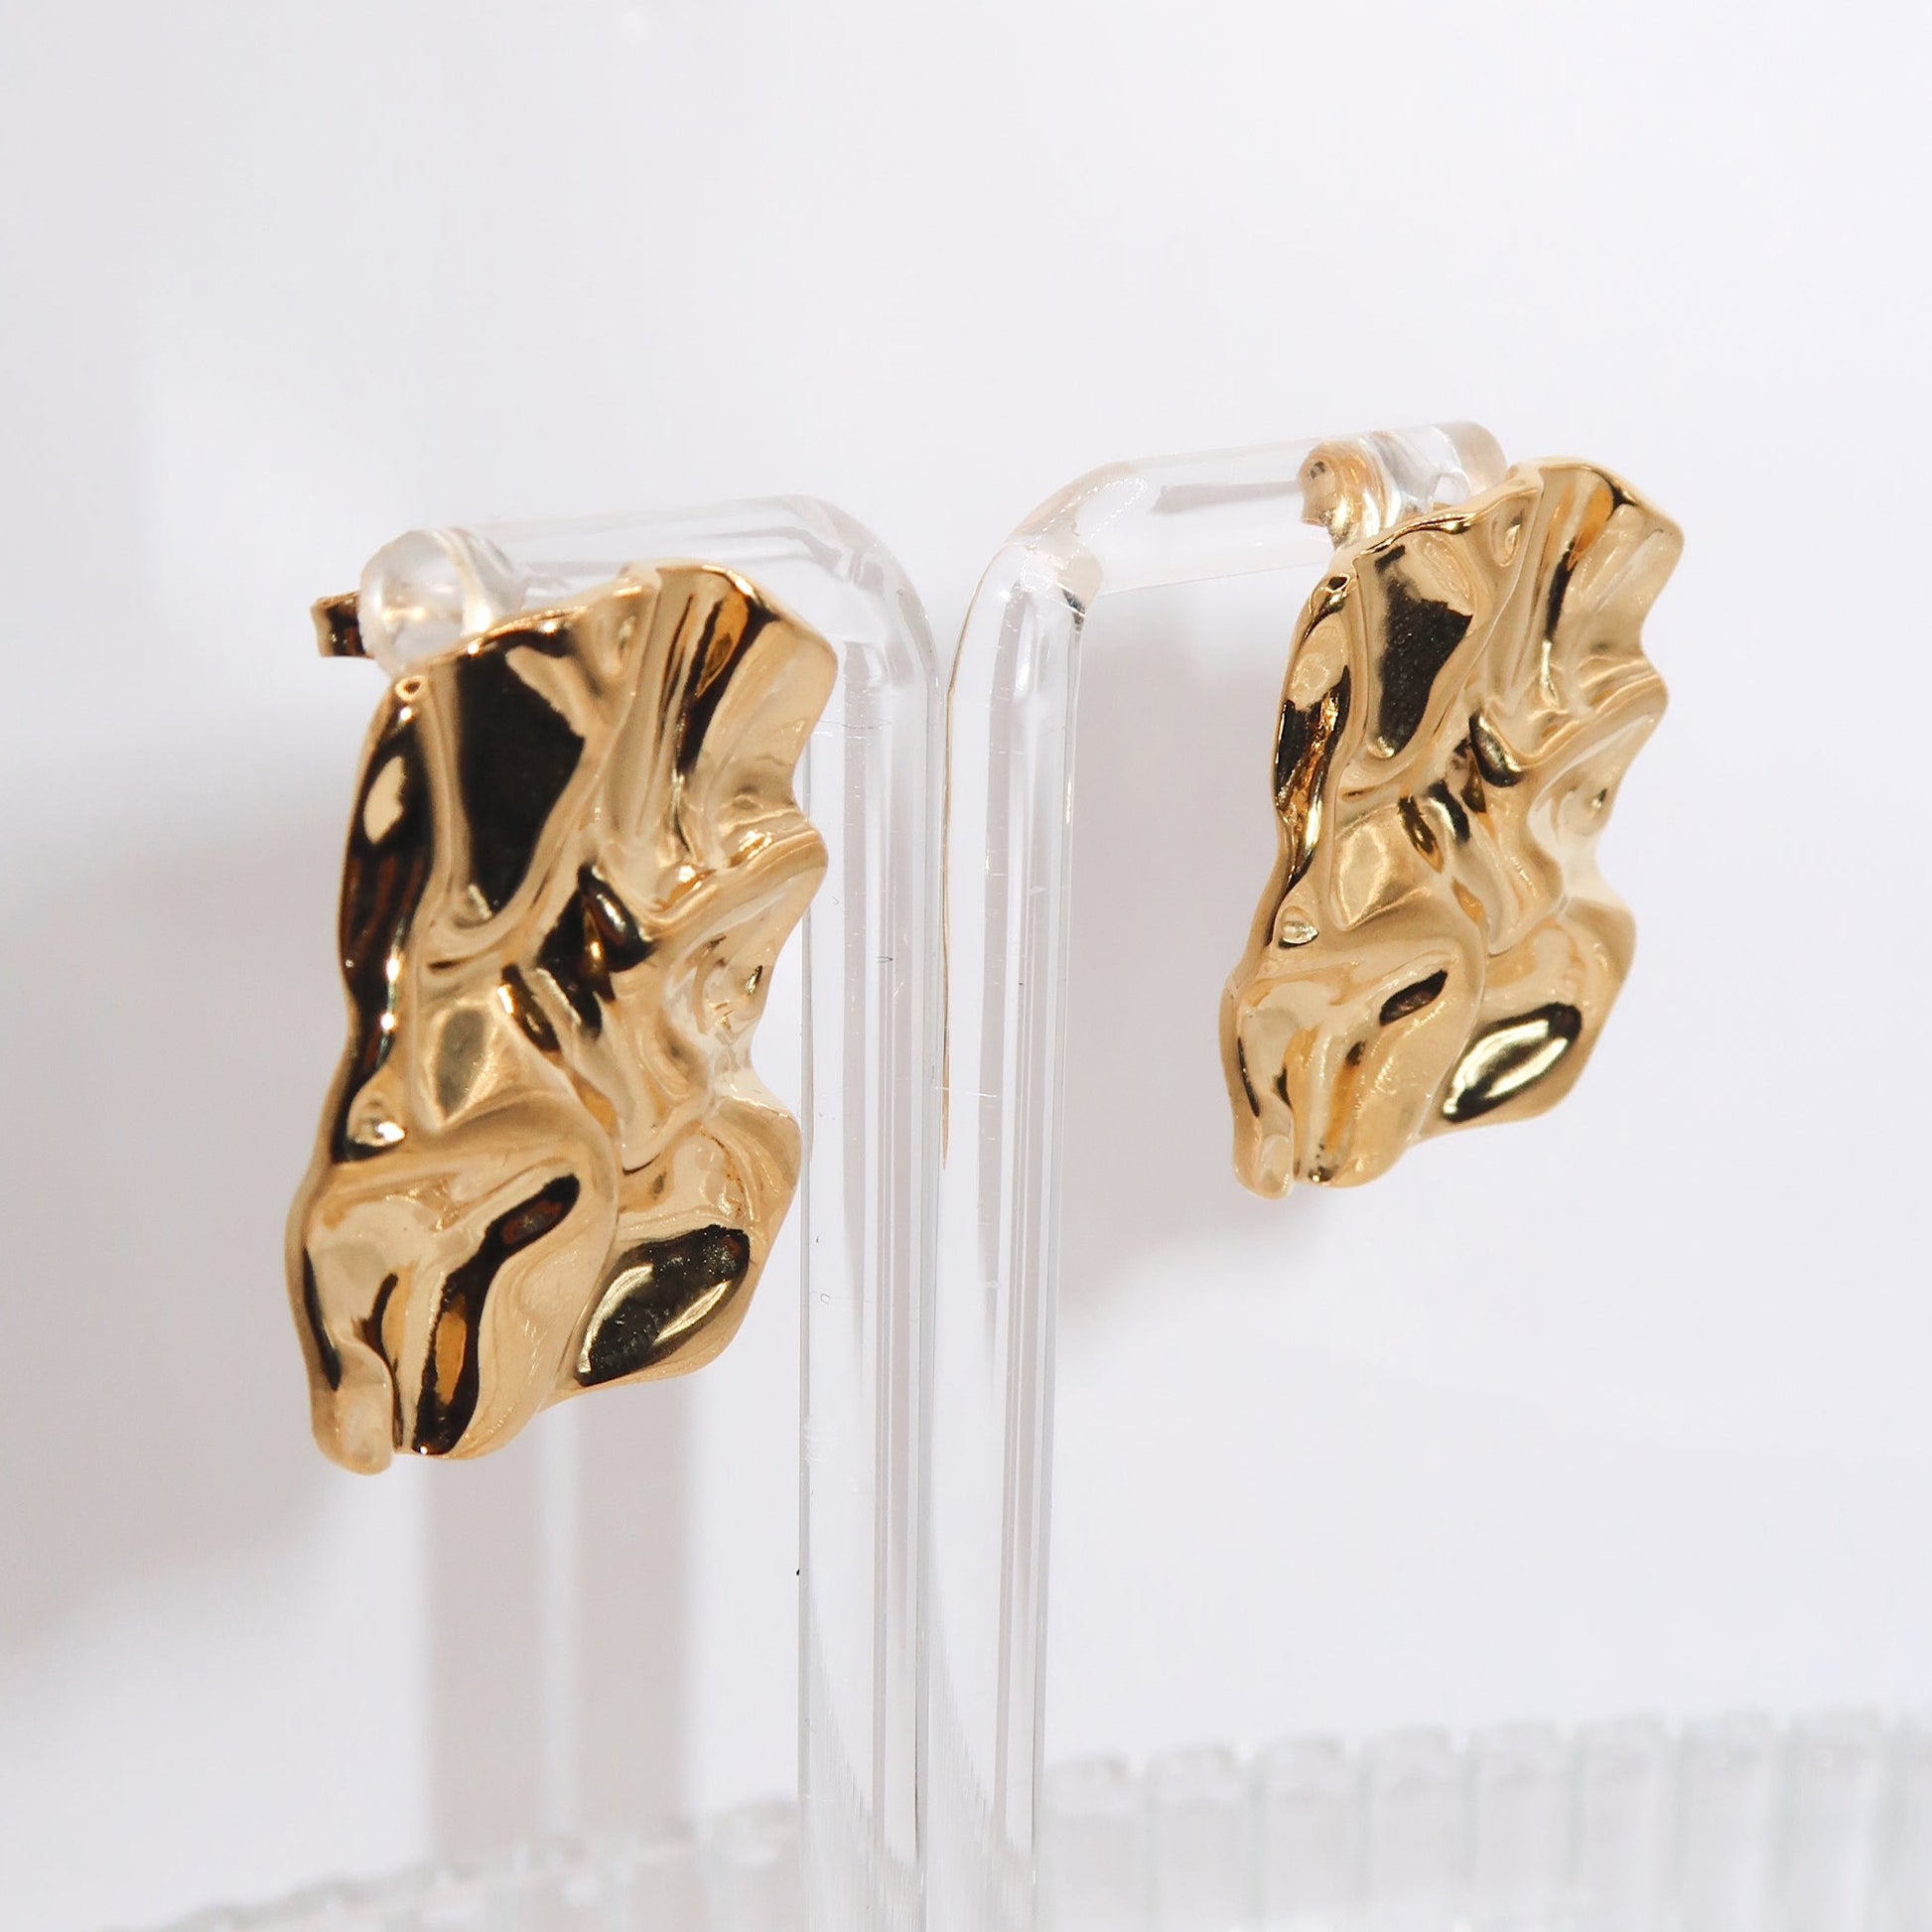 LUNA - 18K PVD Gold Plated Rectangular Hammered Stud Earrings - Mixed Metals